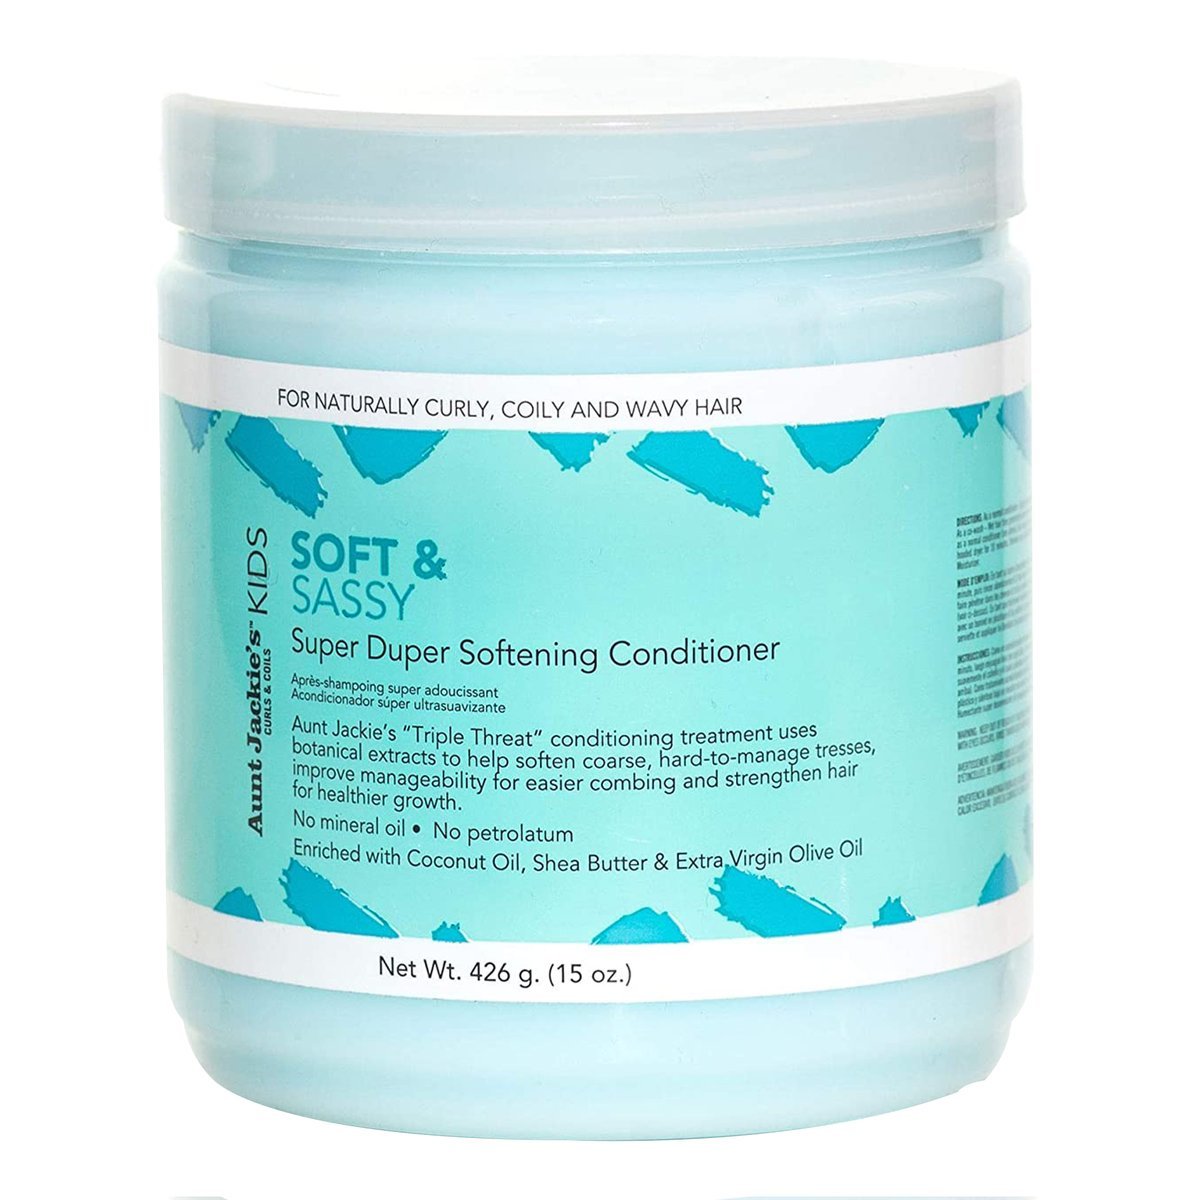 AUNT JACKIE'S "GIRLS" SOFT & SASSY" SOFTENING CONDITIONER 15oz-Aunt Jackie's- Hive Beauty Supply